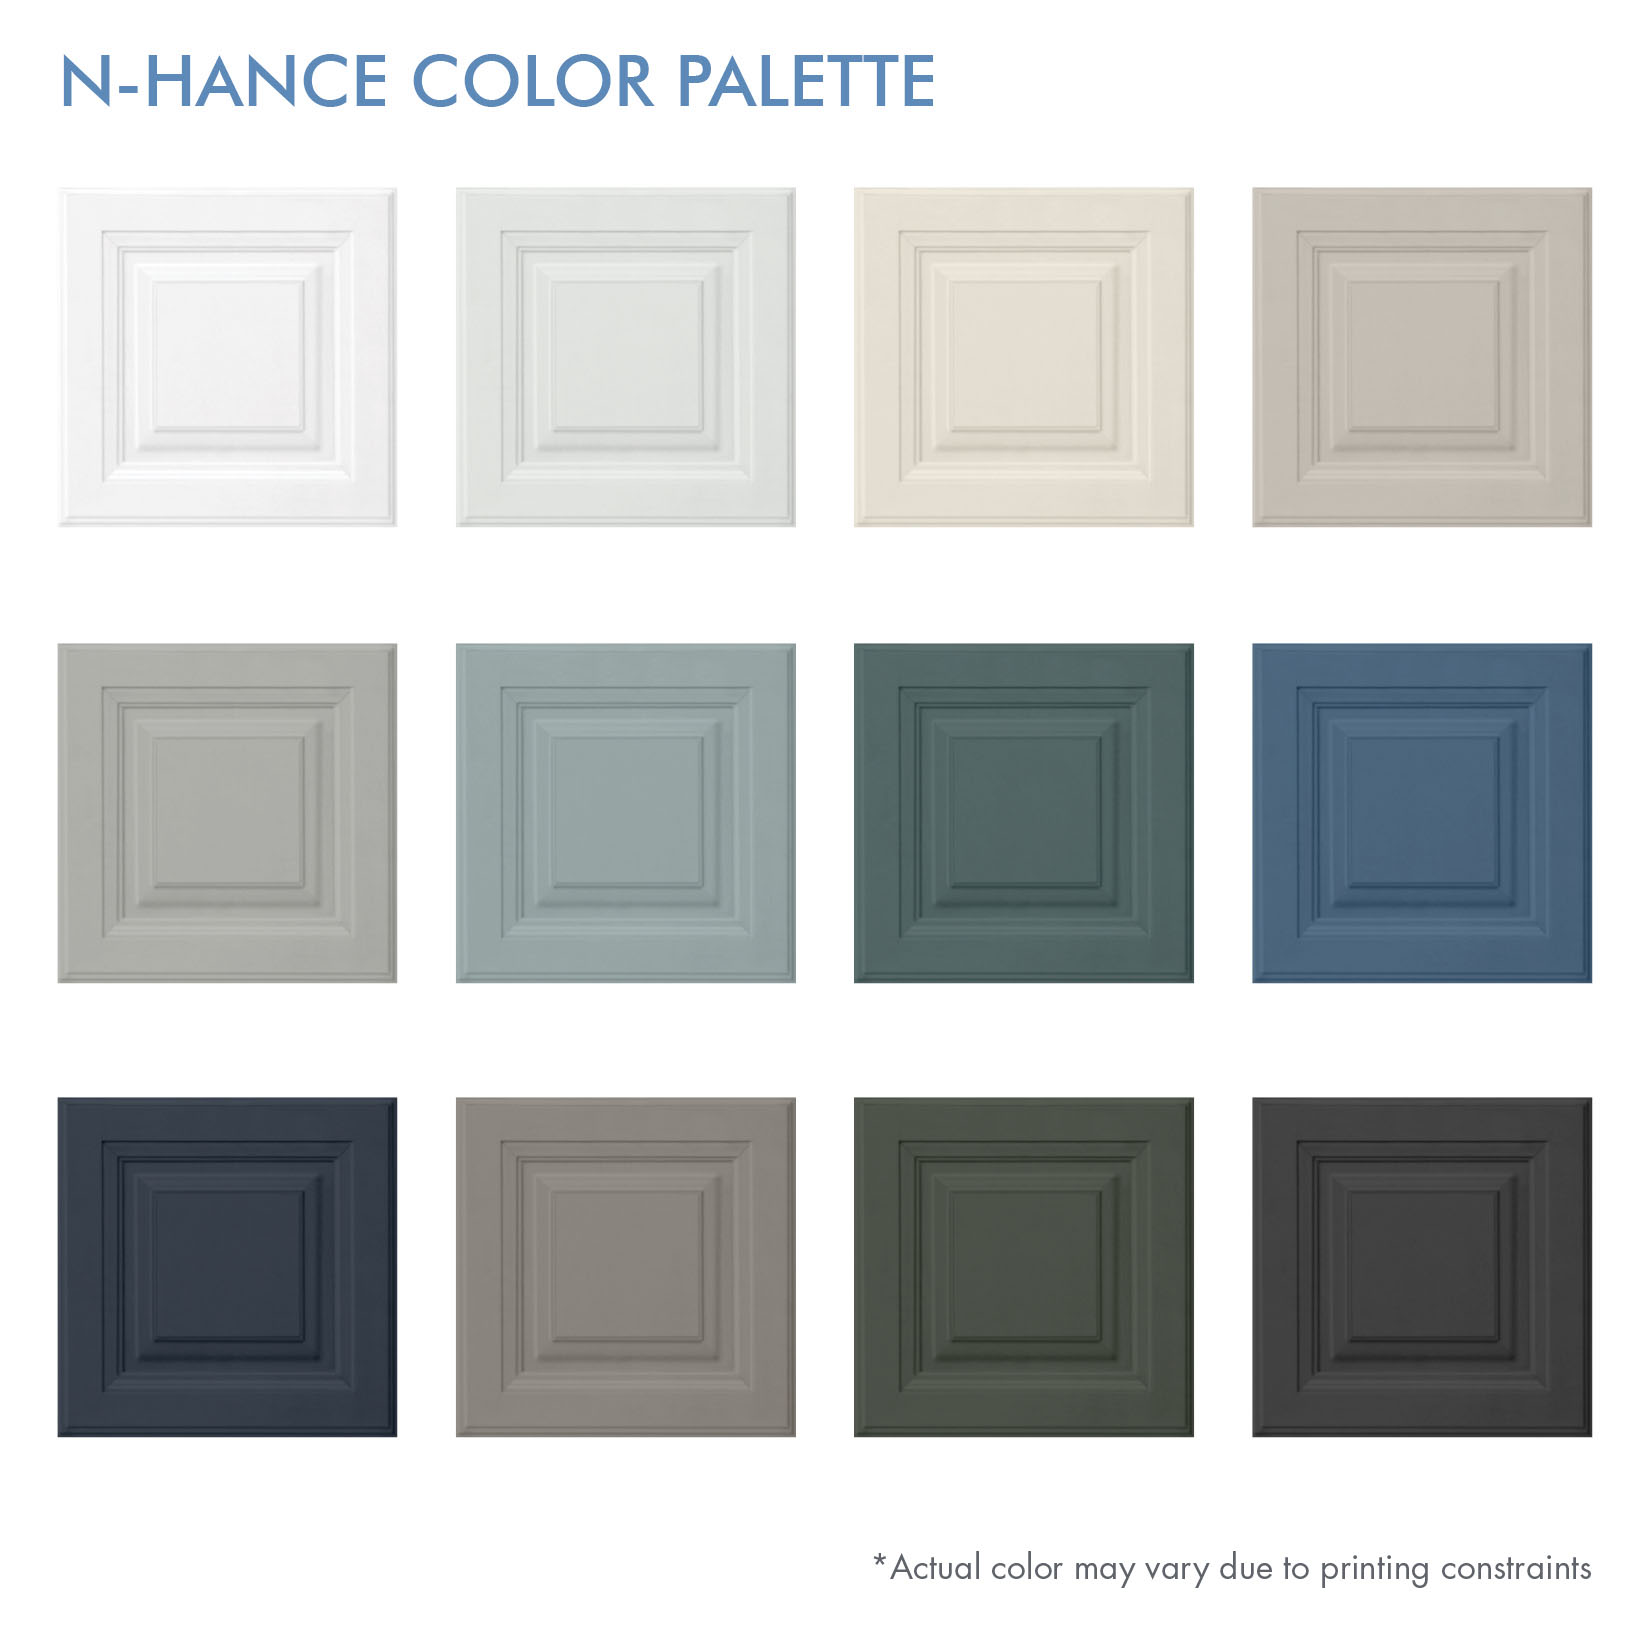 Examples of paint colors offered by N-Hance